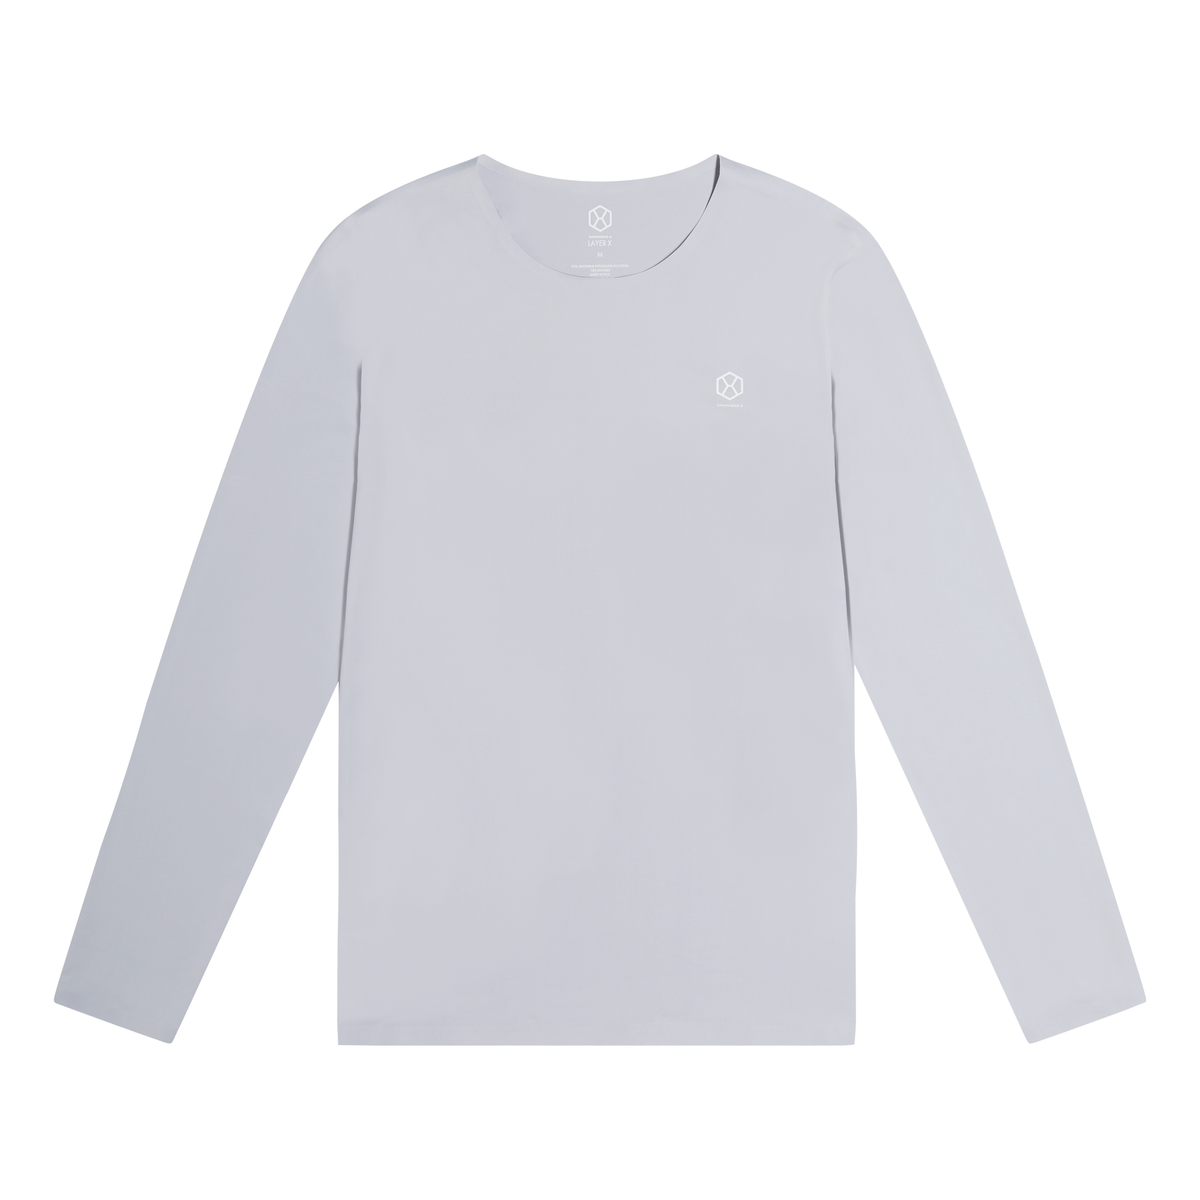 Level Up Thermal Long Sleeve Shirt